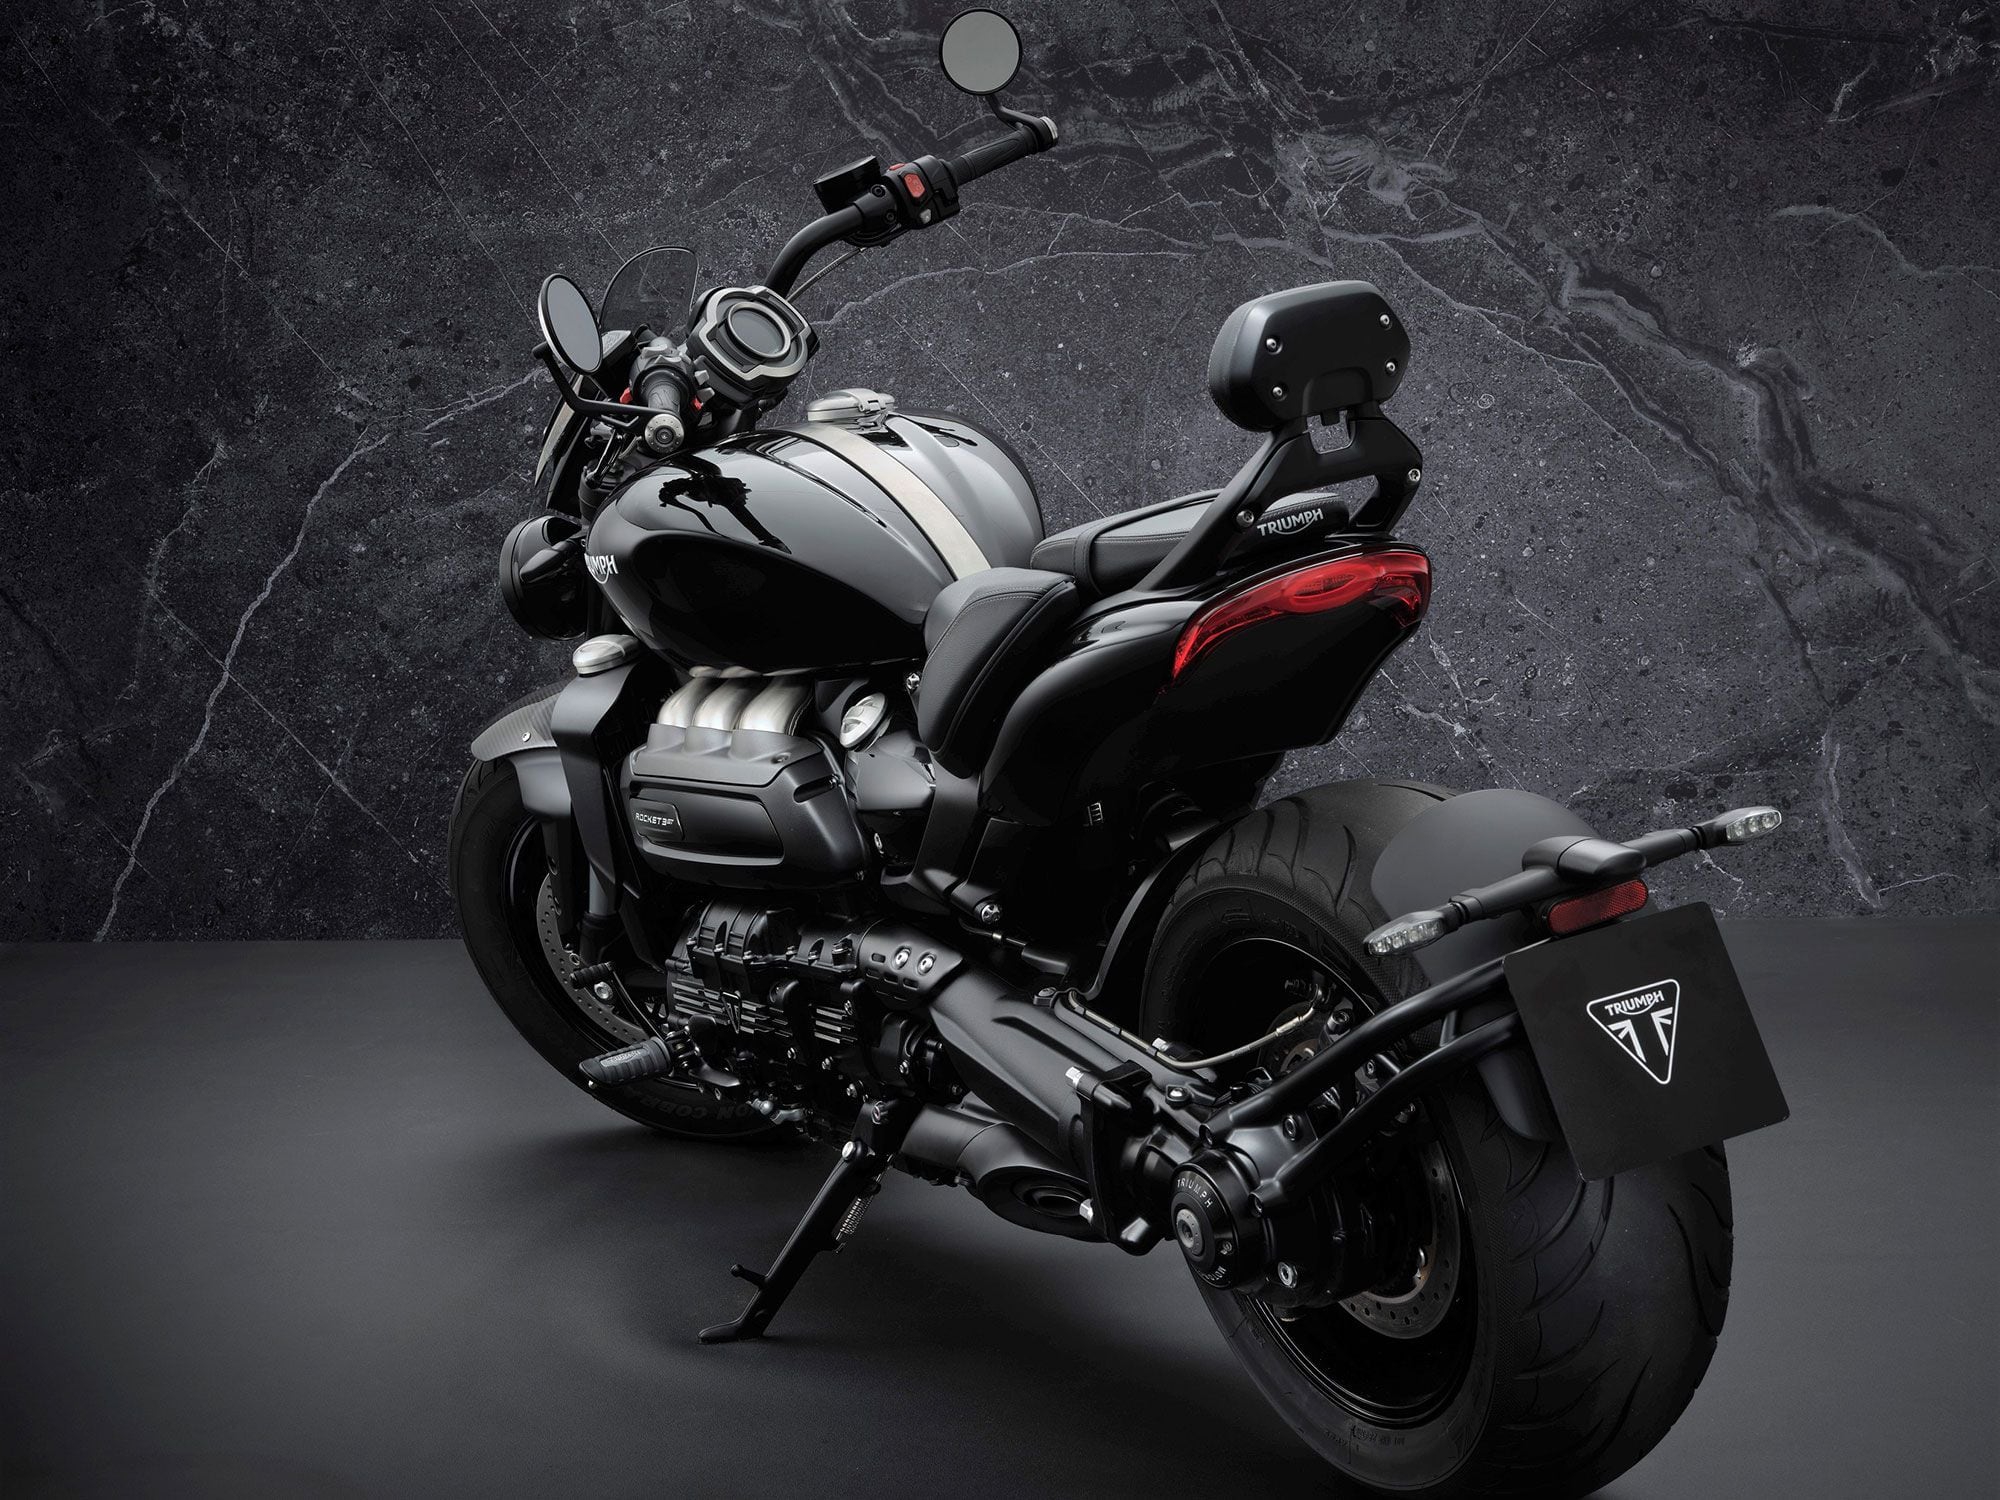 The swingarm guard and even details like the sidestand, bar-end mirrors, footrests, and brake pedal were blacked out. Shown is the GT Triple Black.